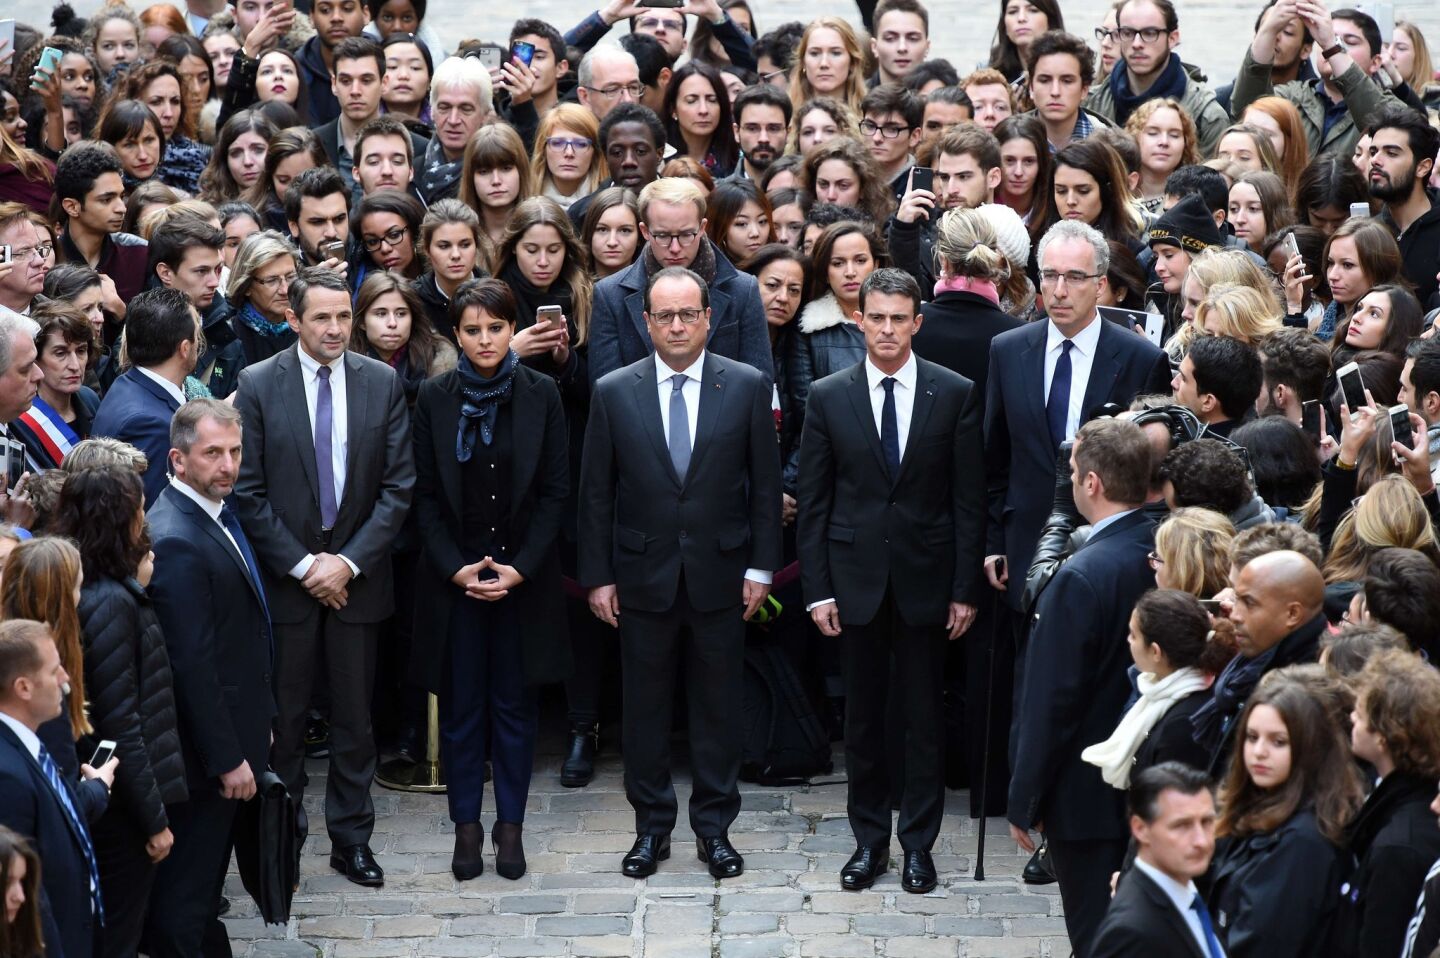 French President Francois Hollande, center, stands with government officials to observe a minute of silence Nov. 16 at the Sorbonne University in Paris.